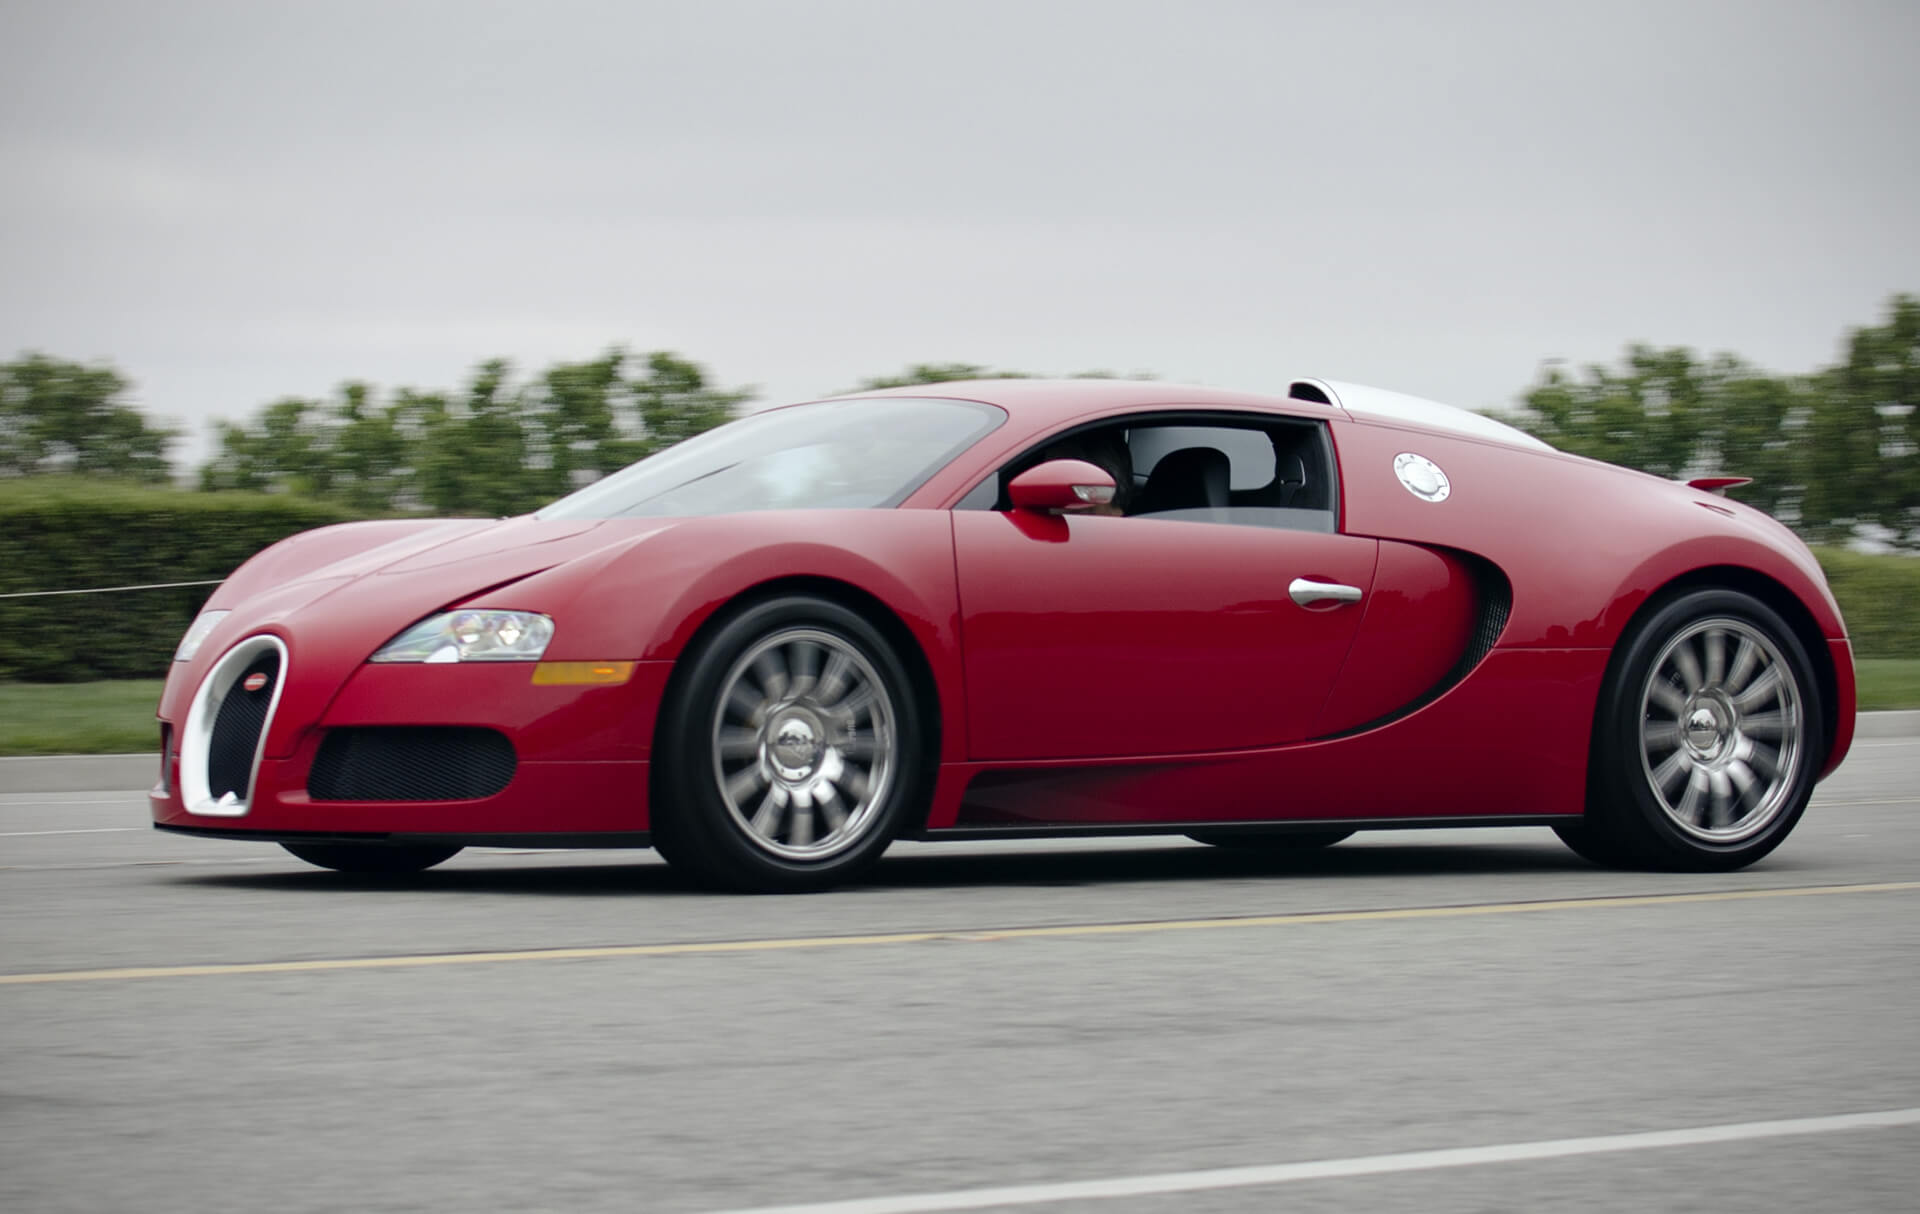 Red Bugatti Veyron on the road